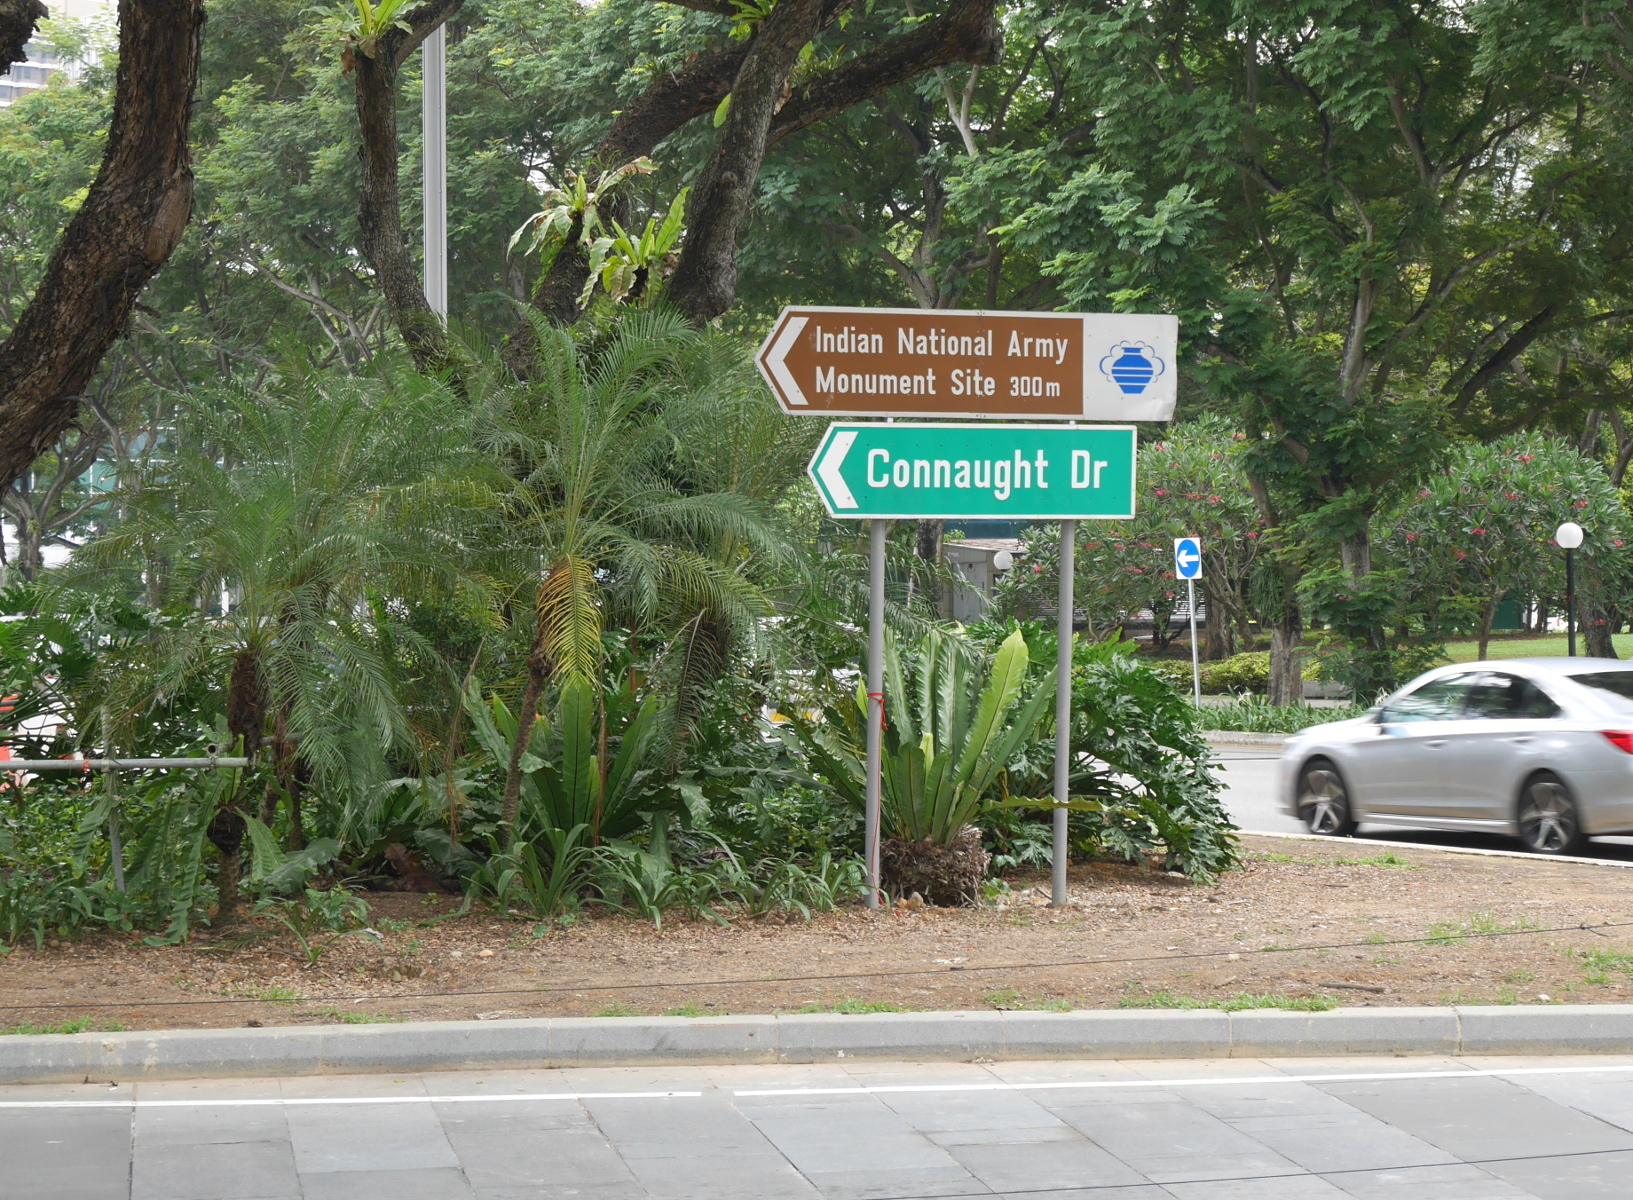 A sign on Connaught Drive, pointing to a historical marker about World War II. (The marker is located on the site of a memorial for the Japanese-affiliated Indian National Army, which was dynamited by Mountbatten’s troops after they retook Singapore in 1945.)